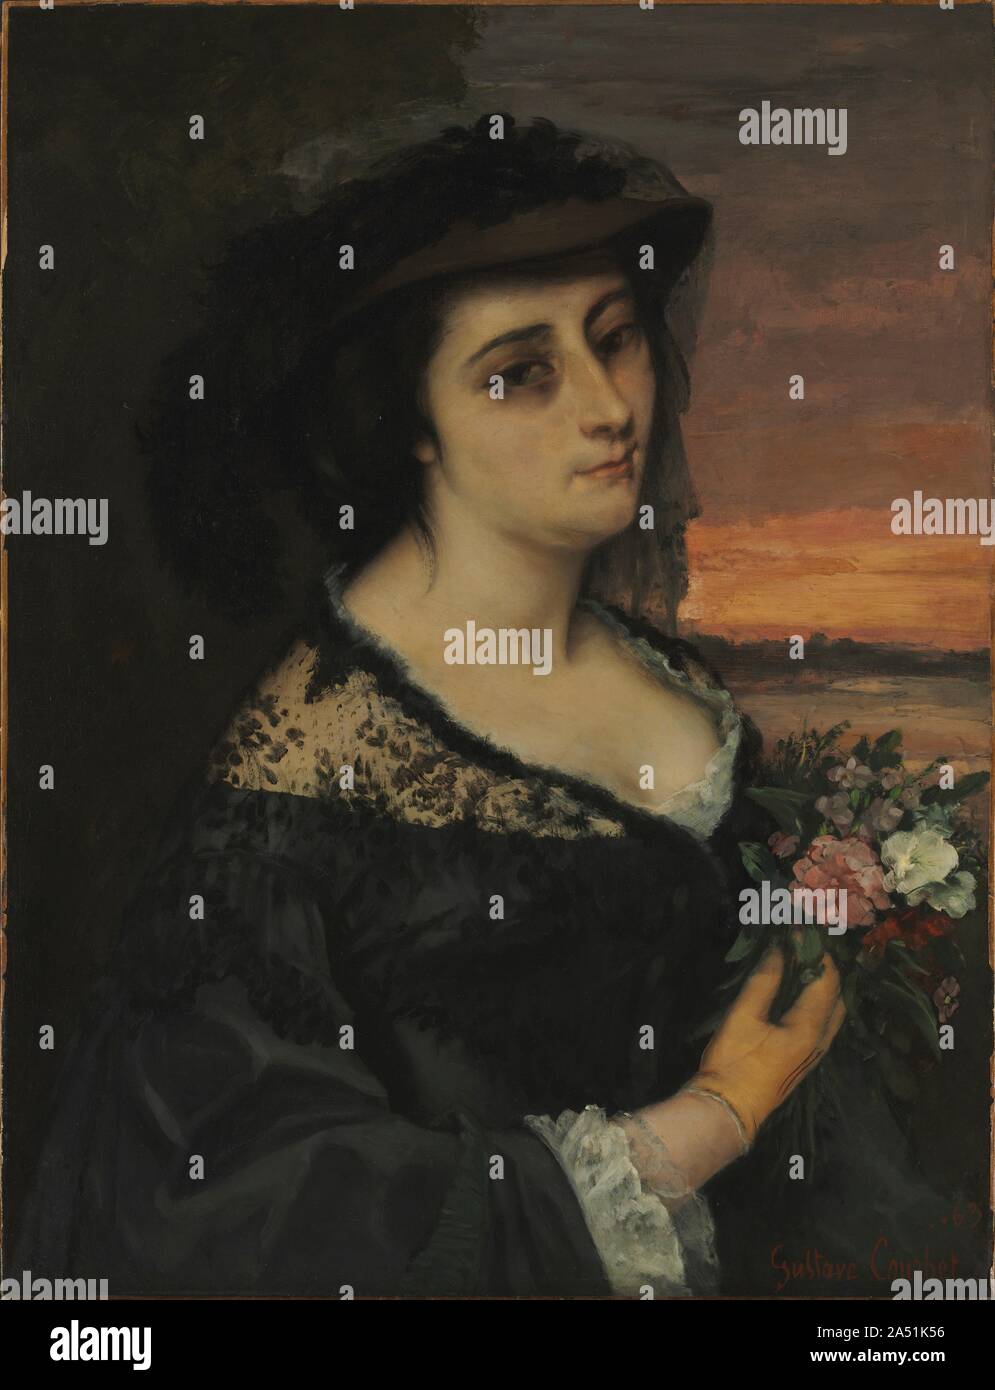 Mme L... (Laure Borreau), 1863. Painted during Courbet's stay in the Saintonge region of western France, this portrait depicts Laure Borreau, owner of a fabric store and ladies confectionery. As the leader of the Realist movement in France, Courbet aimed to convey his democratic and socialist ideals by portraying ordinary people in a truthful, unidealized manner. While considering himself a radical innovator, Courbet nonetheless exhibited this portrait under the title Mme L... at the Paris Salon of 1863. Stock Photo